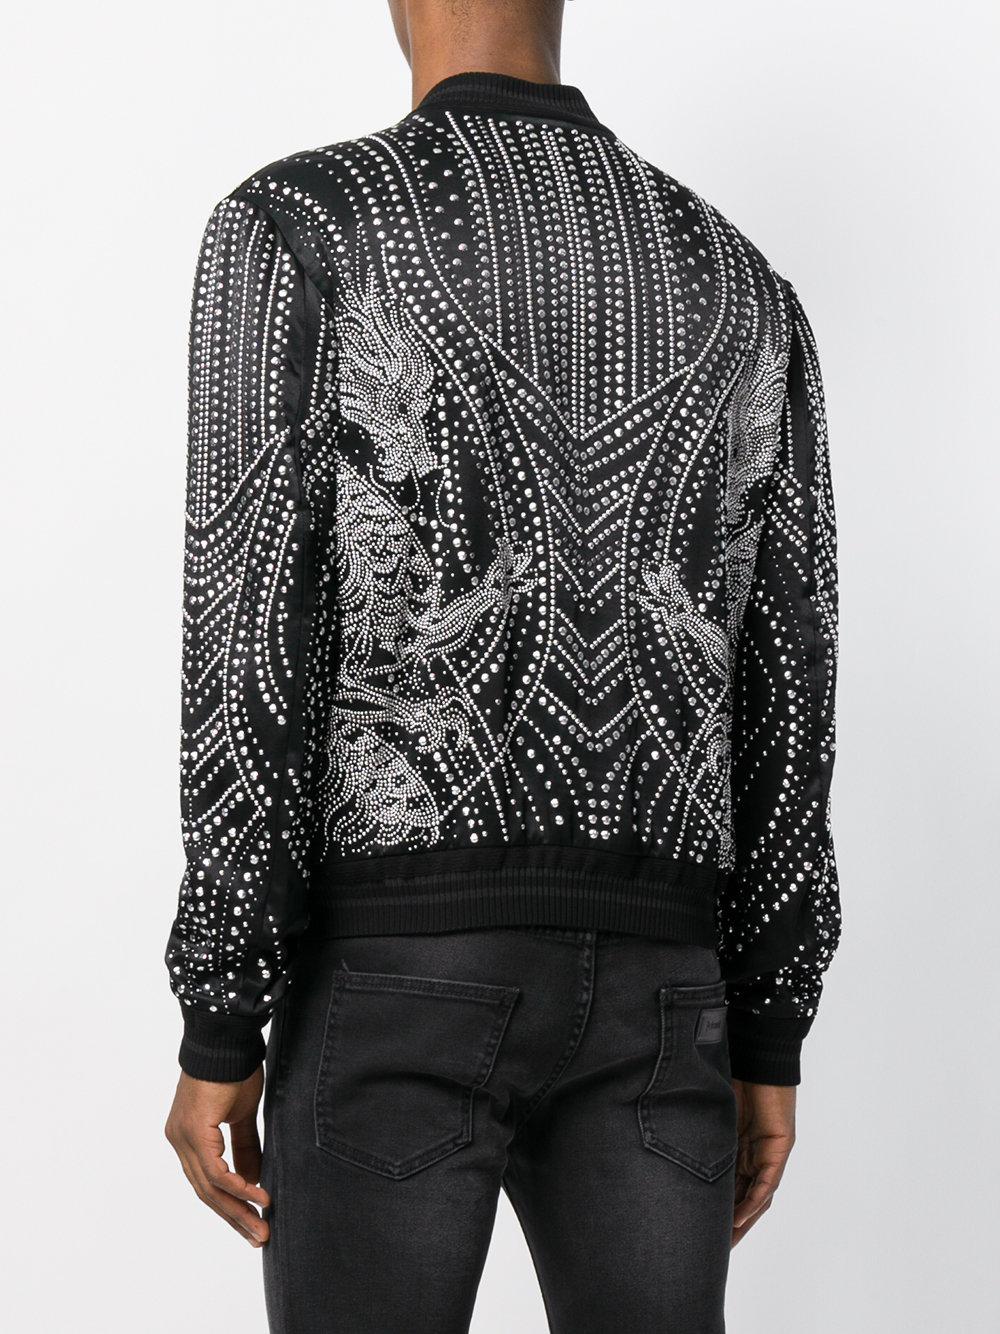 Just Cavalli Synthetic Studded Bomber Jacket in Black for Men - Lyst